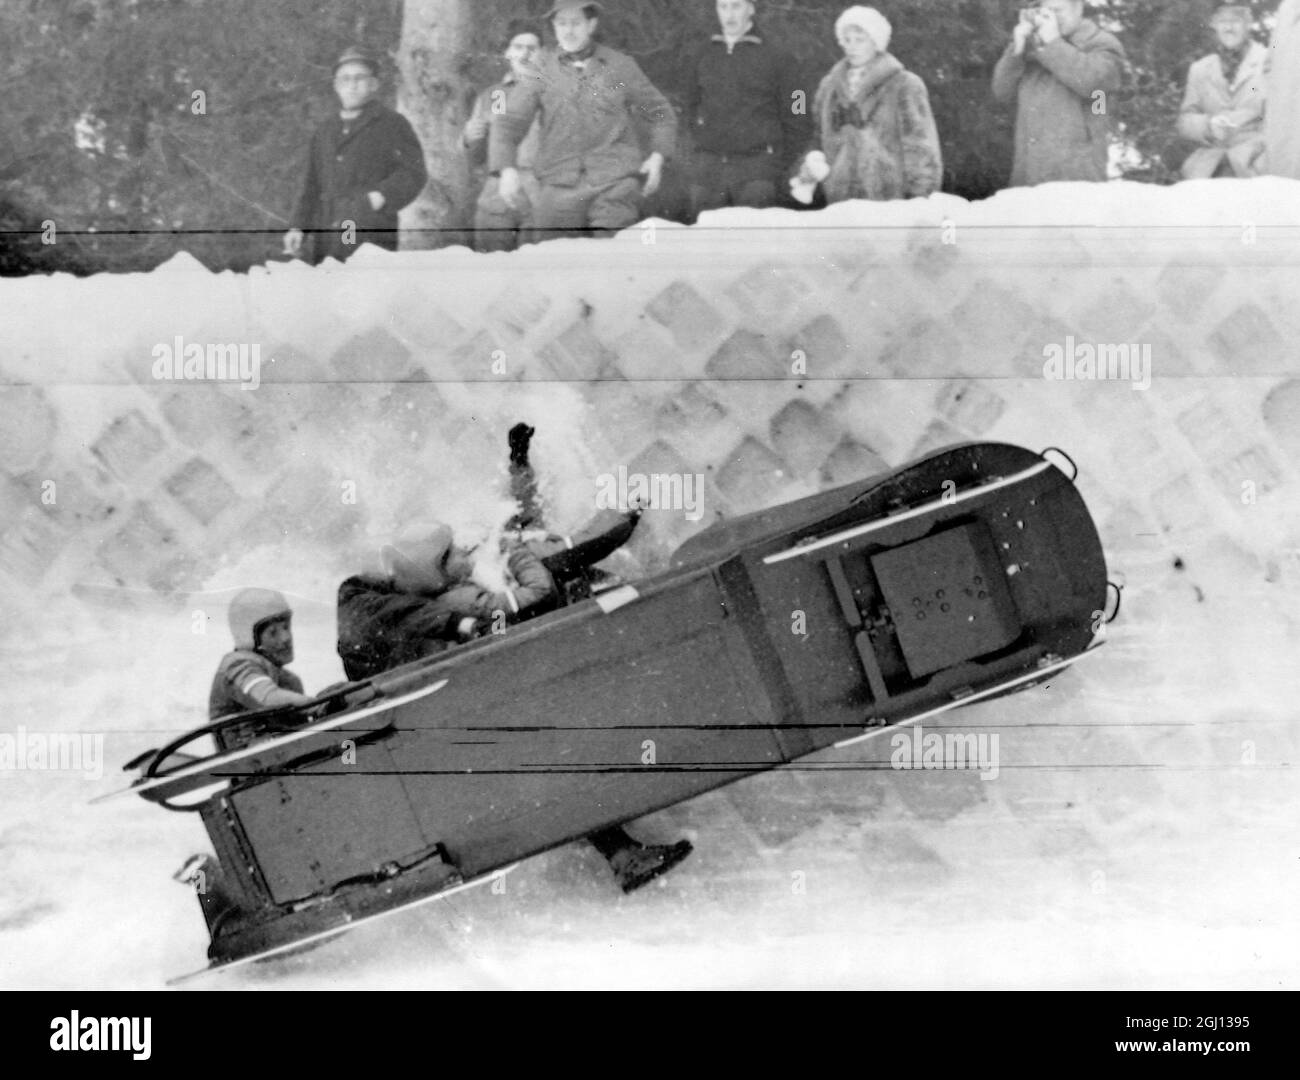 BOBSLEIGH CHAMPIONSHIPS IN GERMANY FOURMEN DISASTER PRACTICE RUN 24 JANUARY 1962 Stock Photo